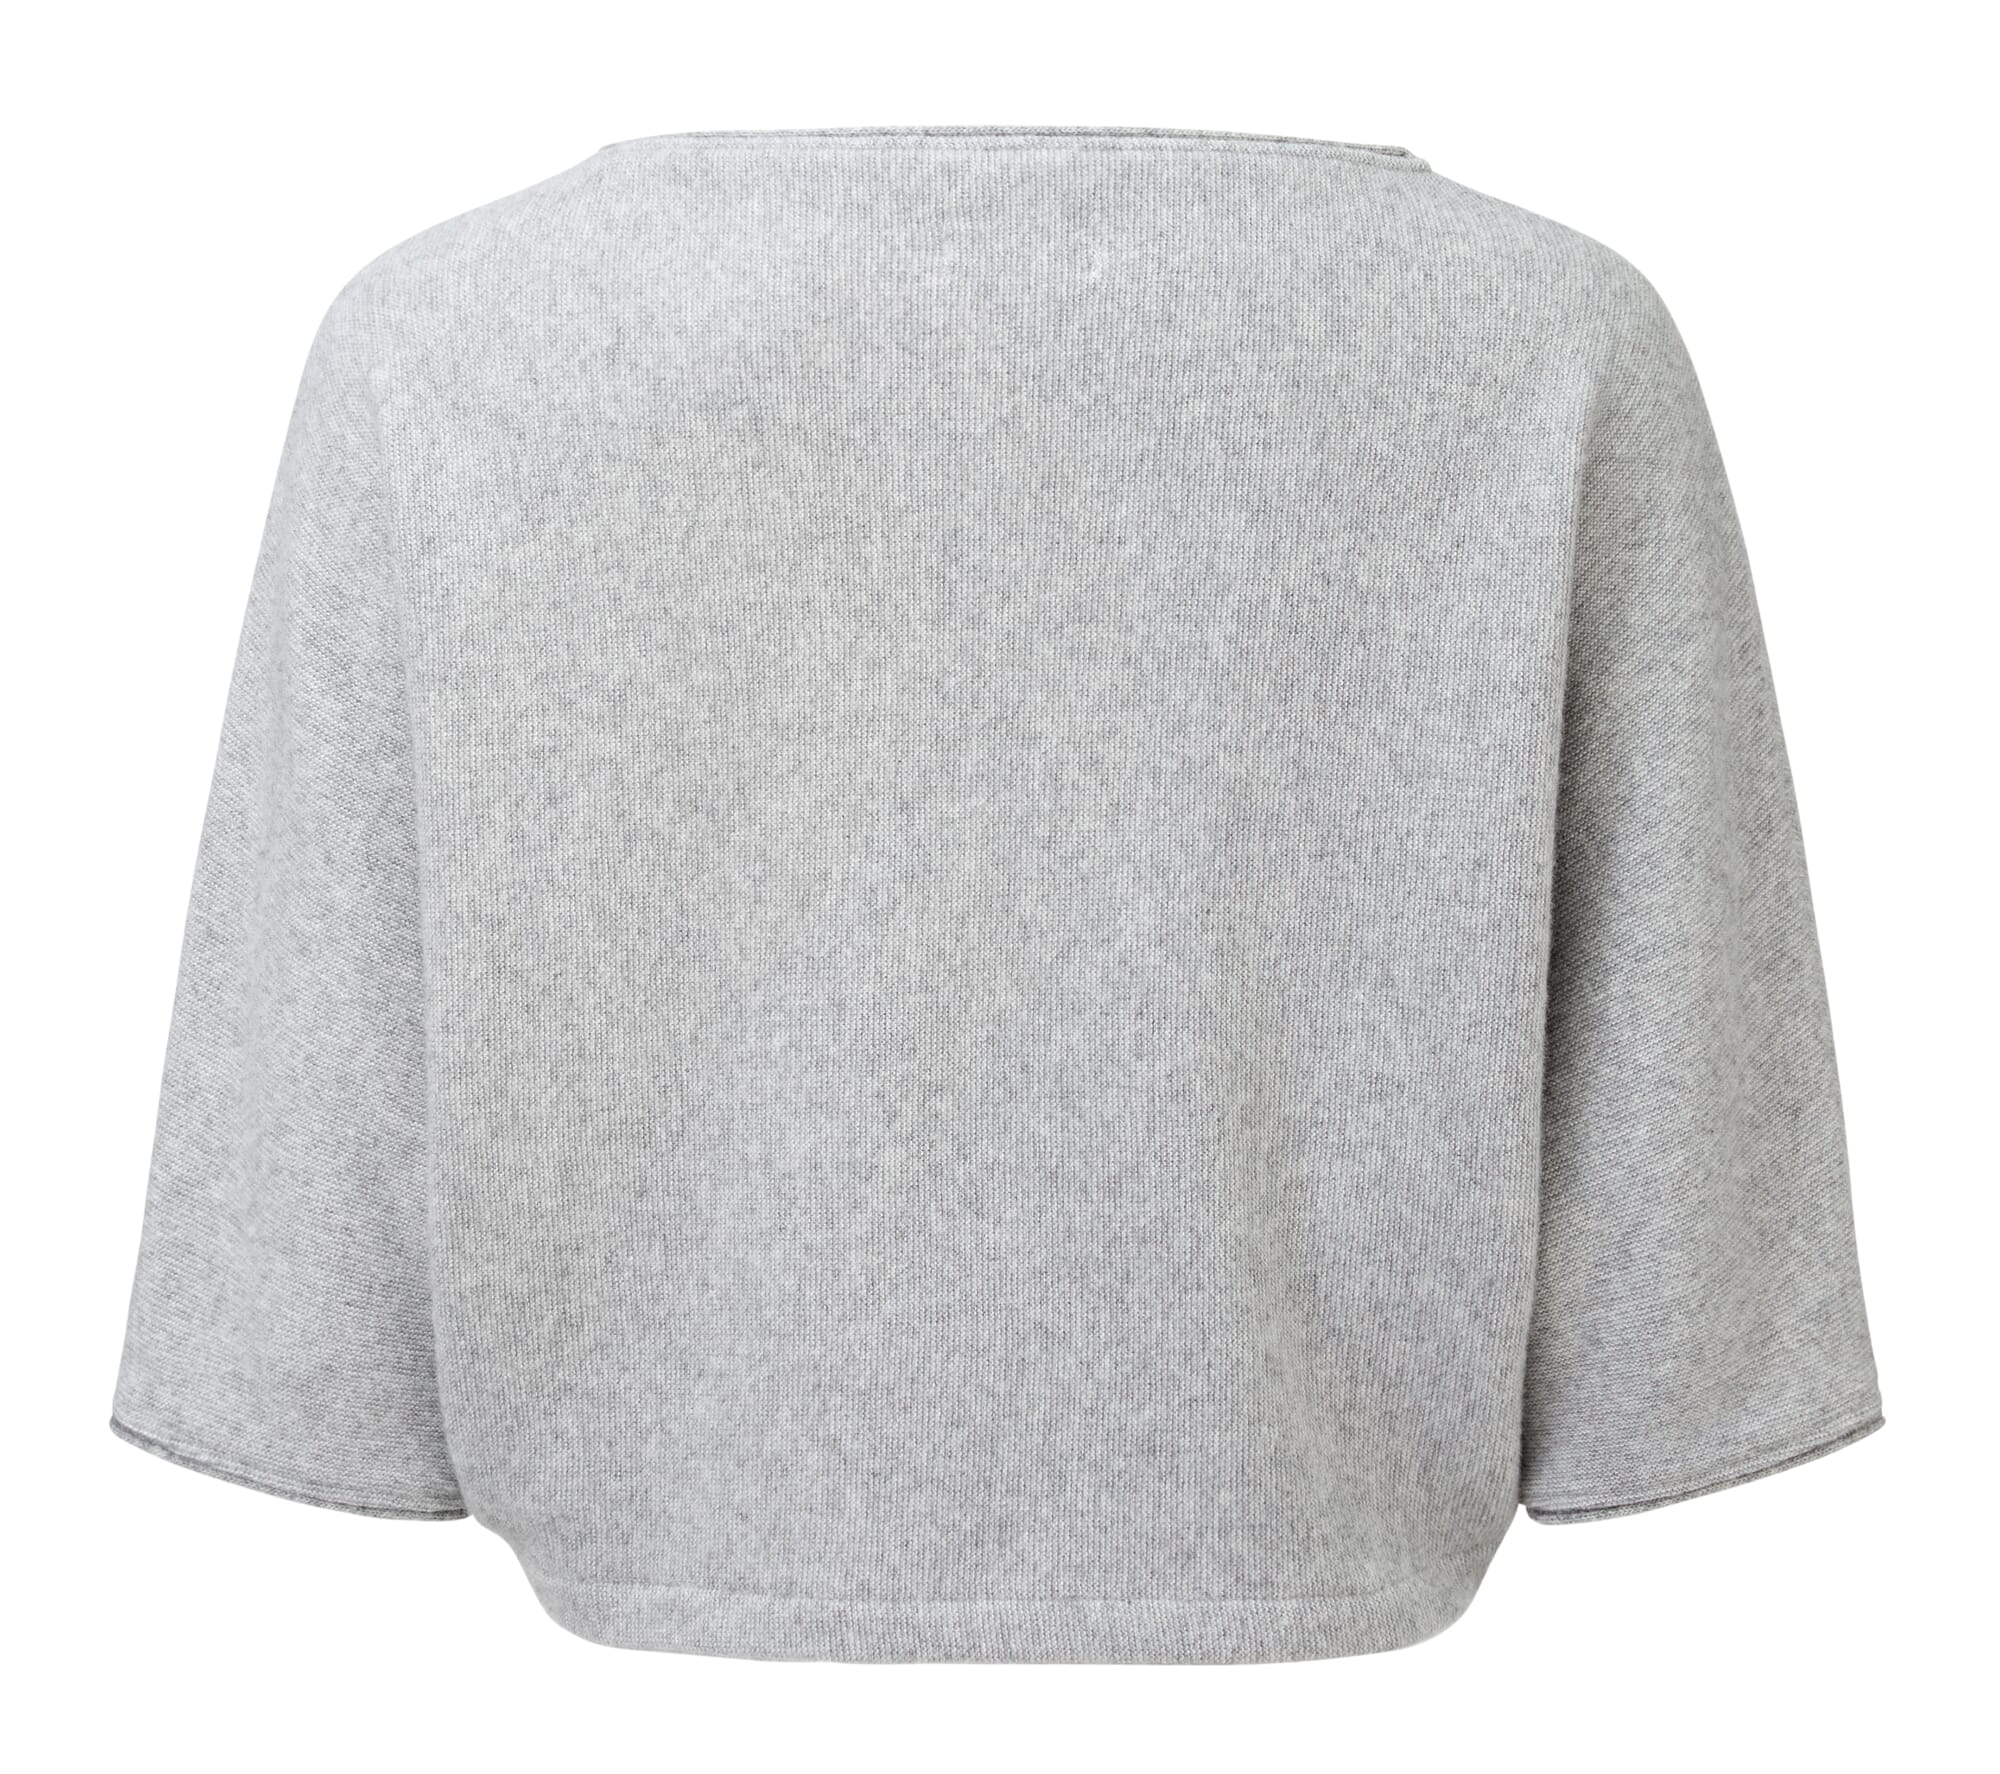 Ladies cropped sweater, Light gray